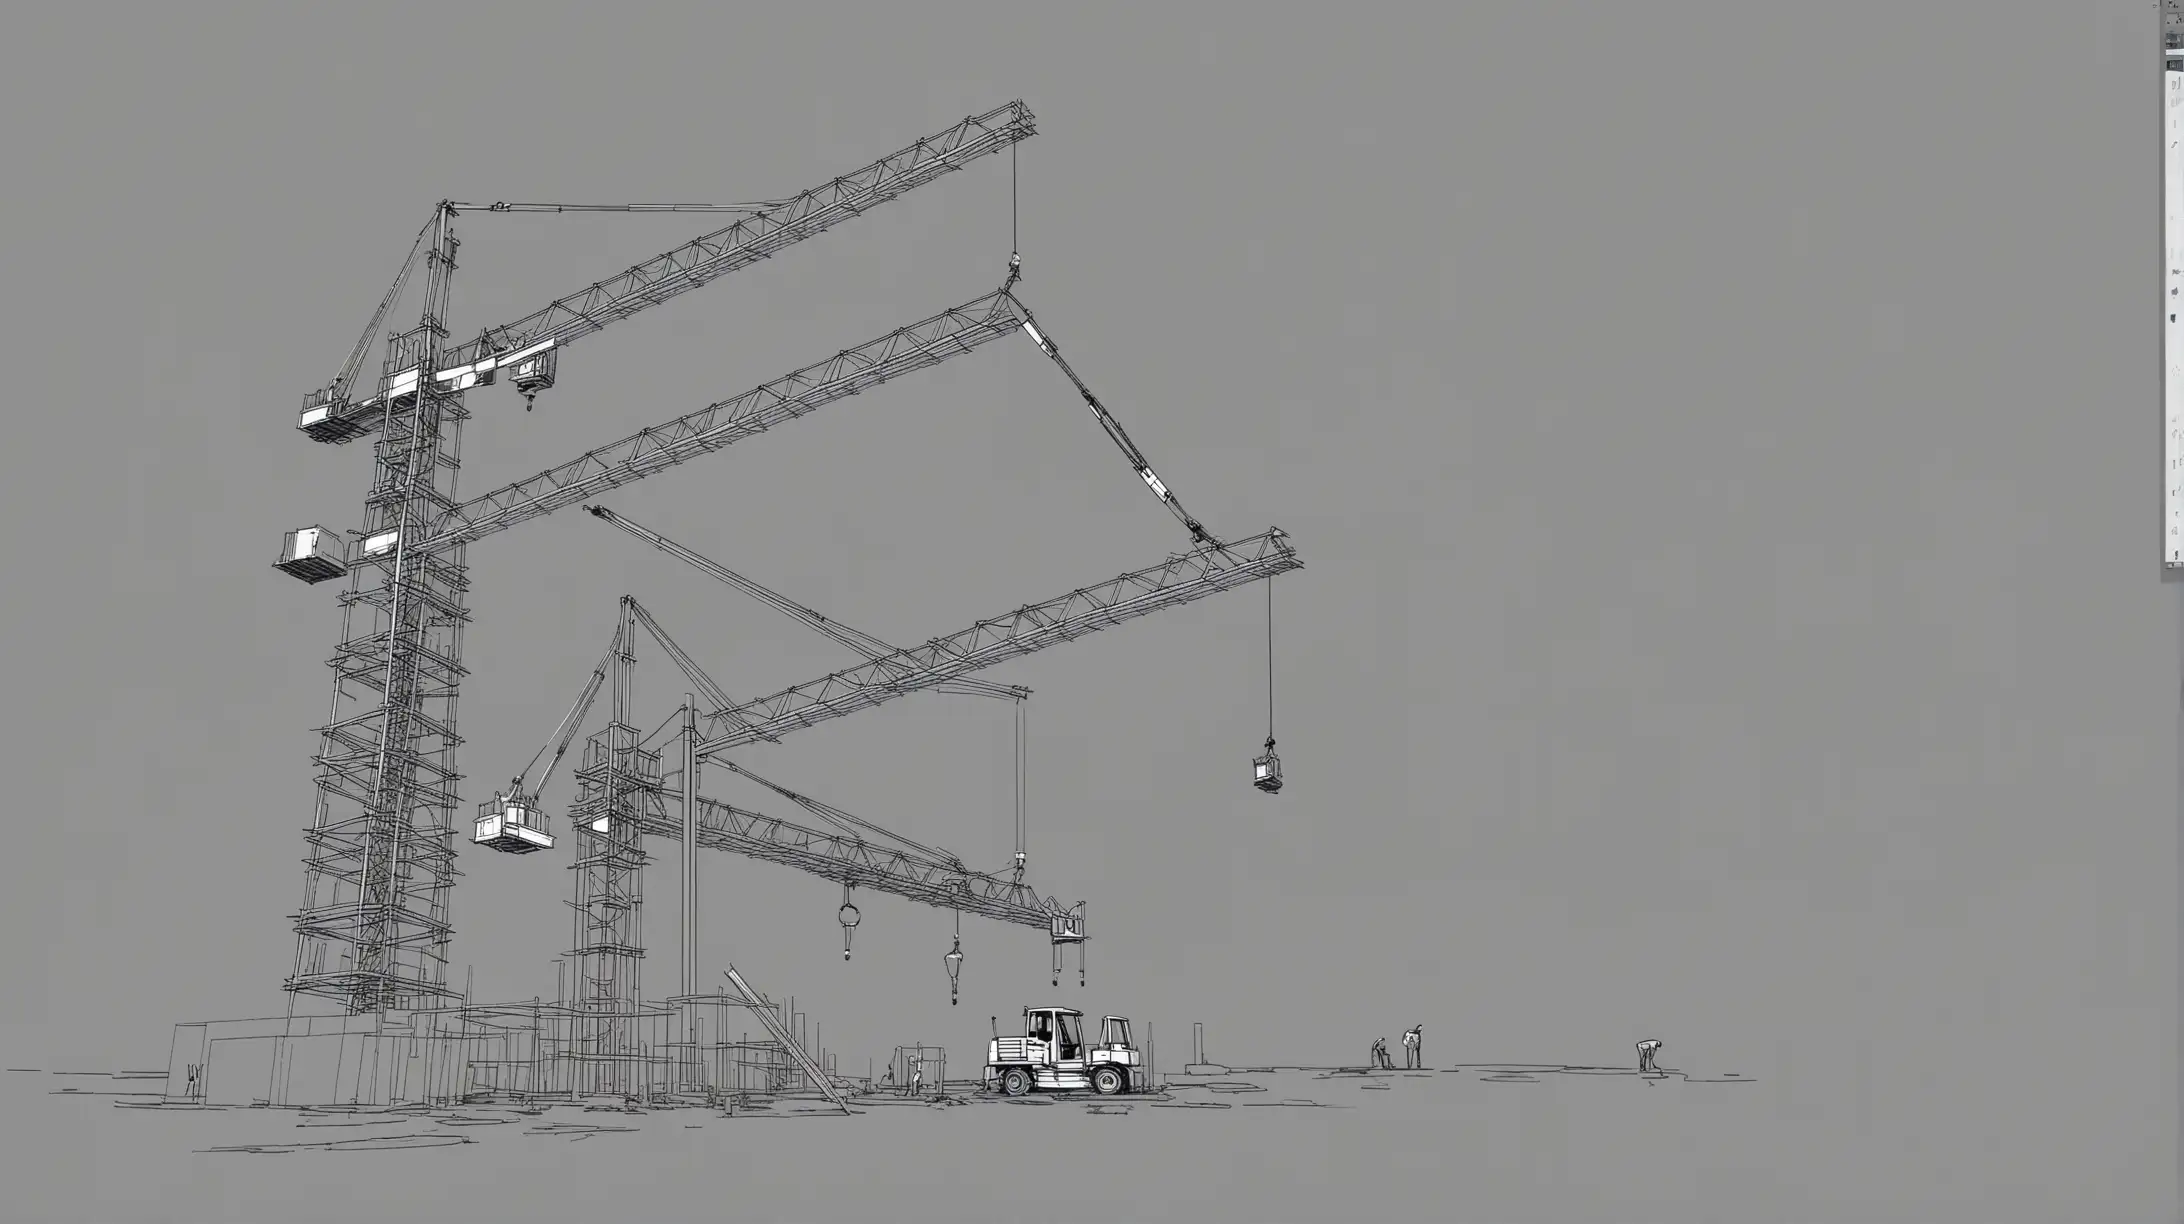 Urban Construction Site with Workers and Cranes